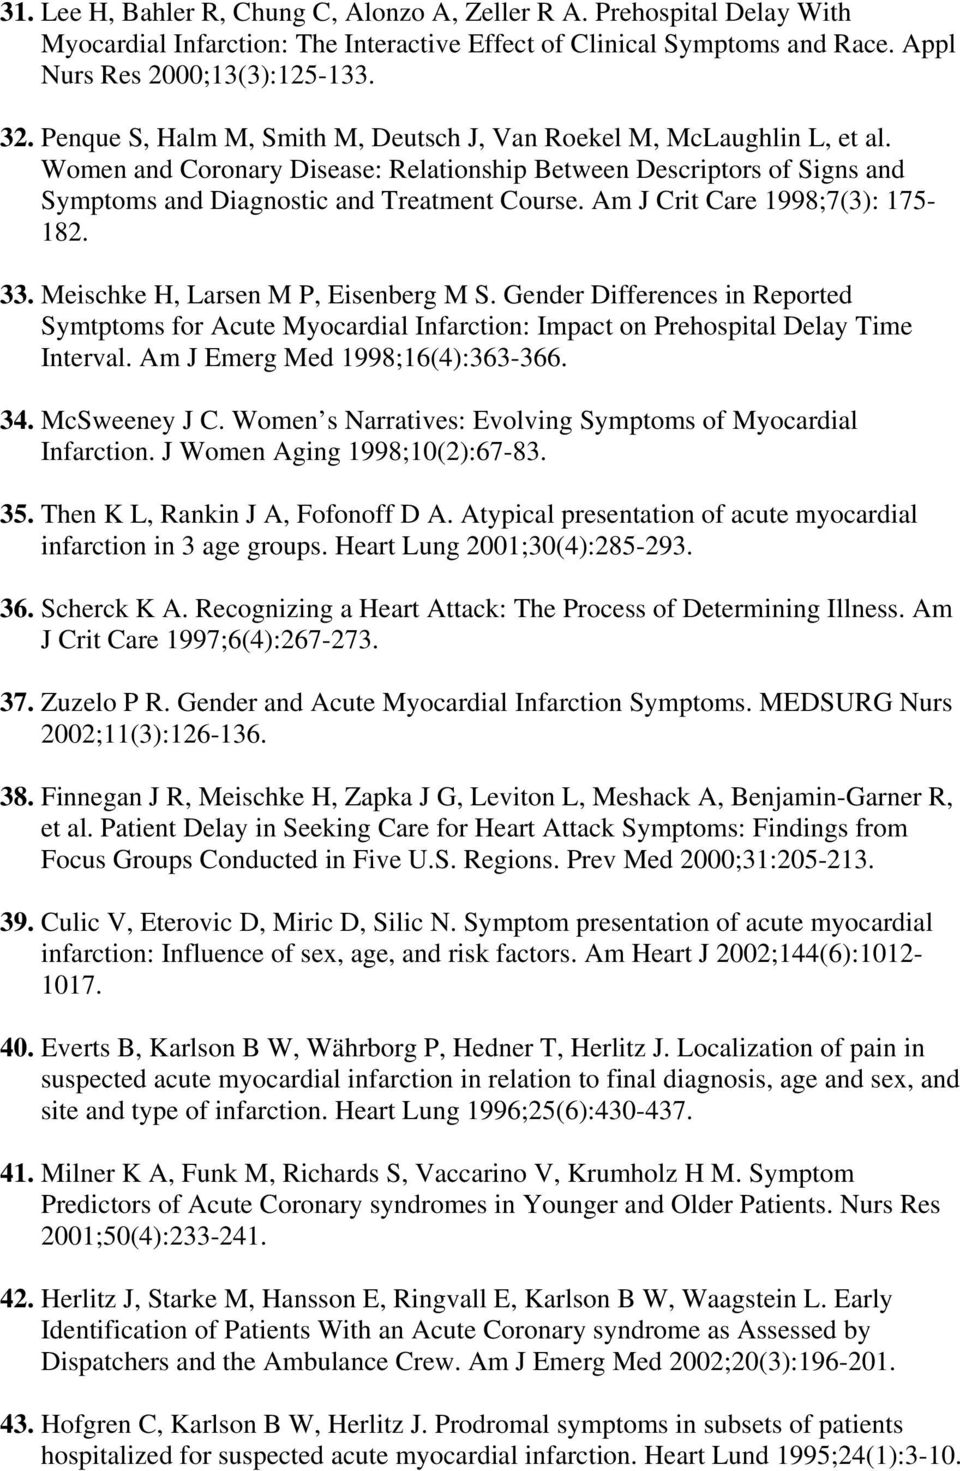 Am J Crit Care 1998;7(3): 175-182. 33. Meischke H, Larsen M P, Eisenberg M S. Gender Differences in Reported Symtptoms for Acute Myocardial Infarction: Impact on Prehospital Delay Time Interval.